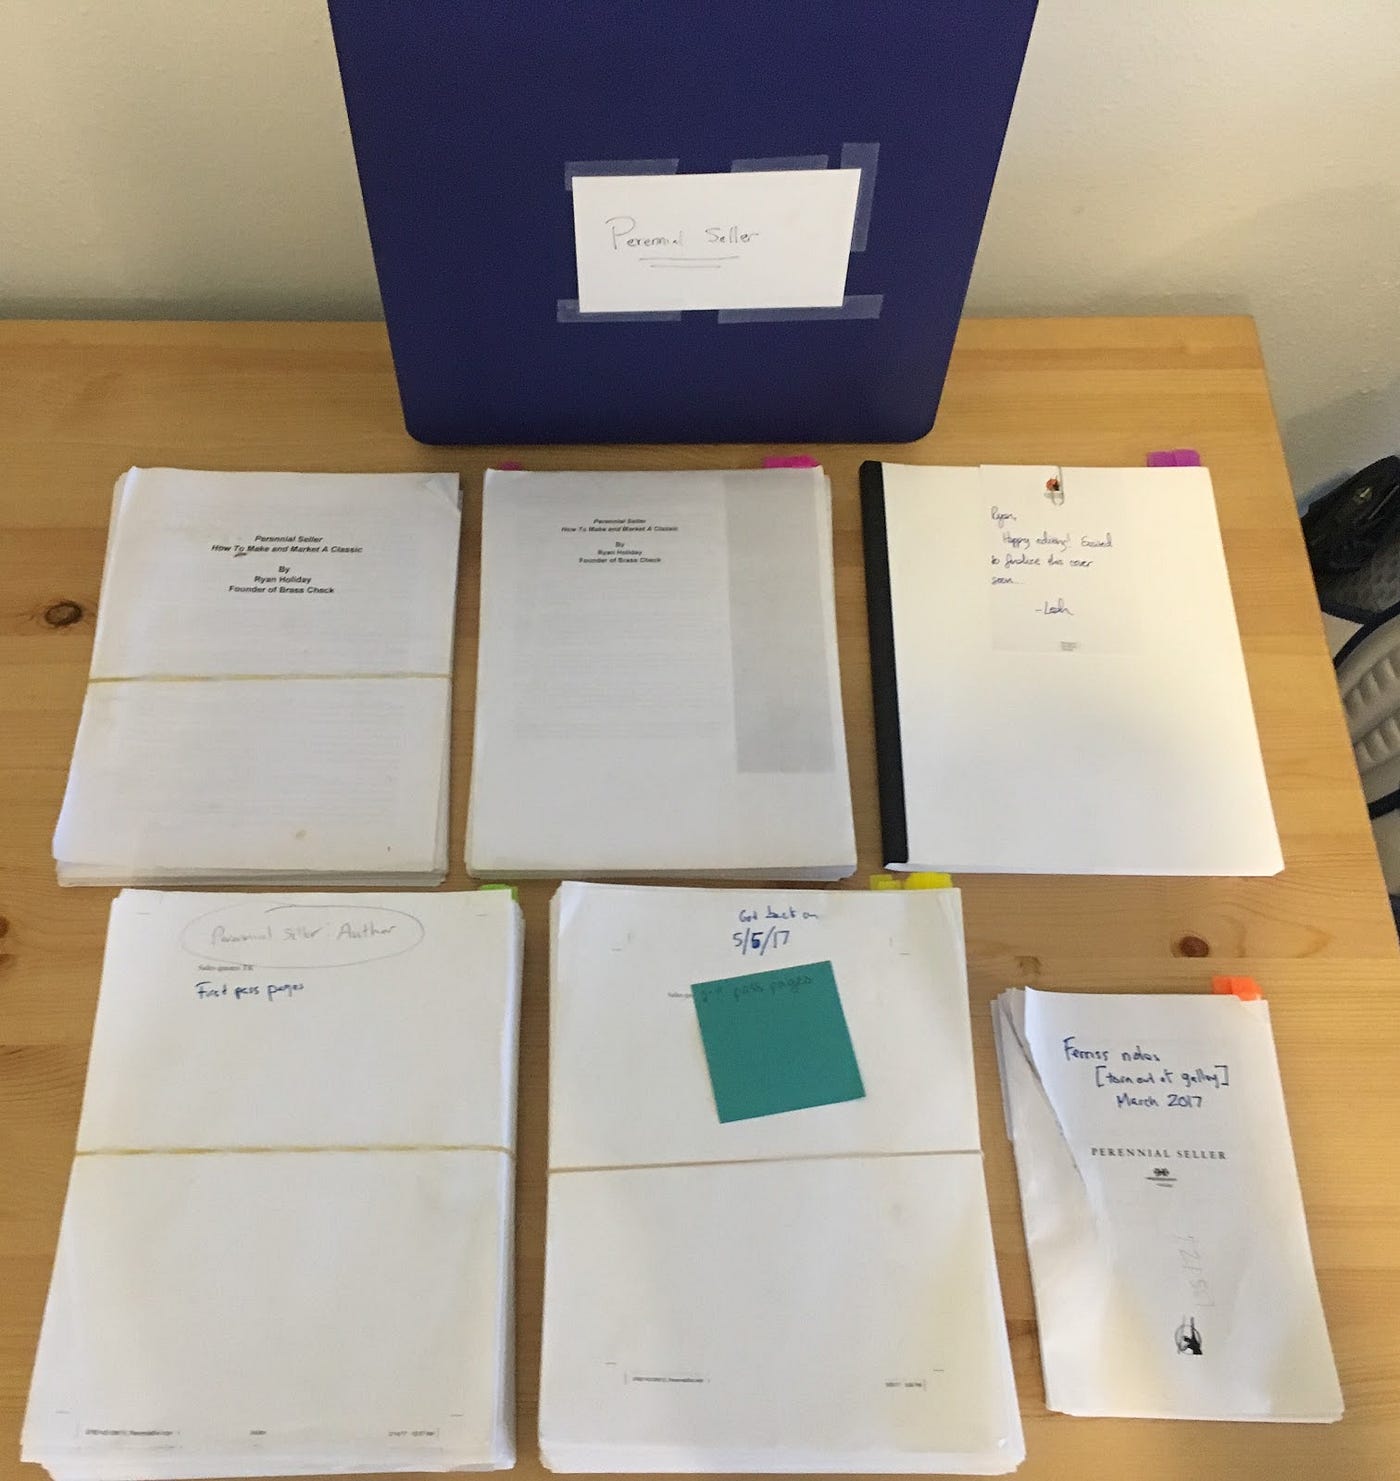 Smythson MEGA Review Part 1 - 12 Writing Papers Reviewed